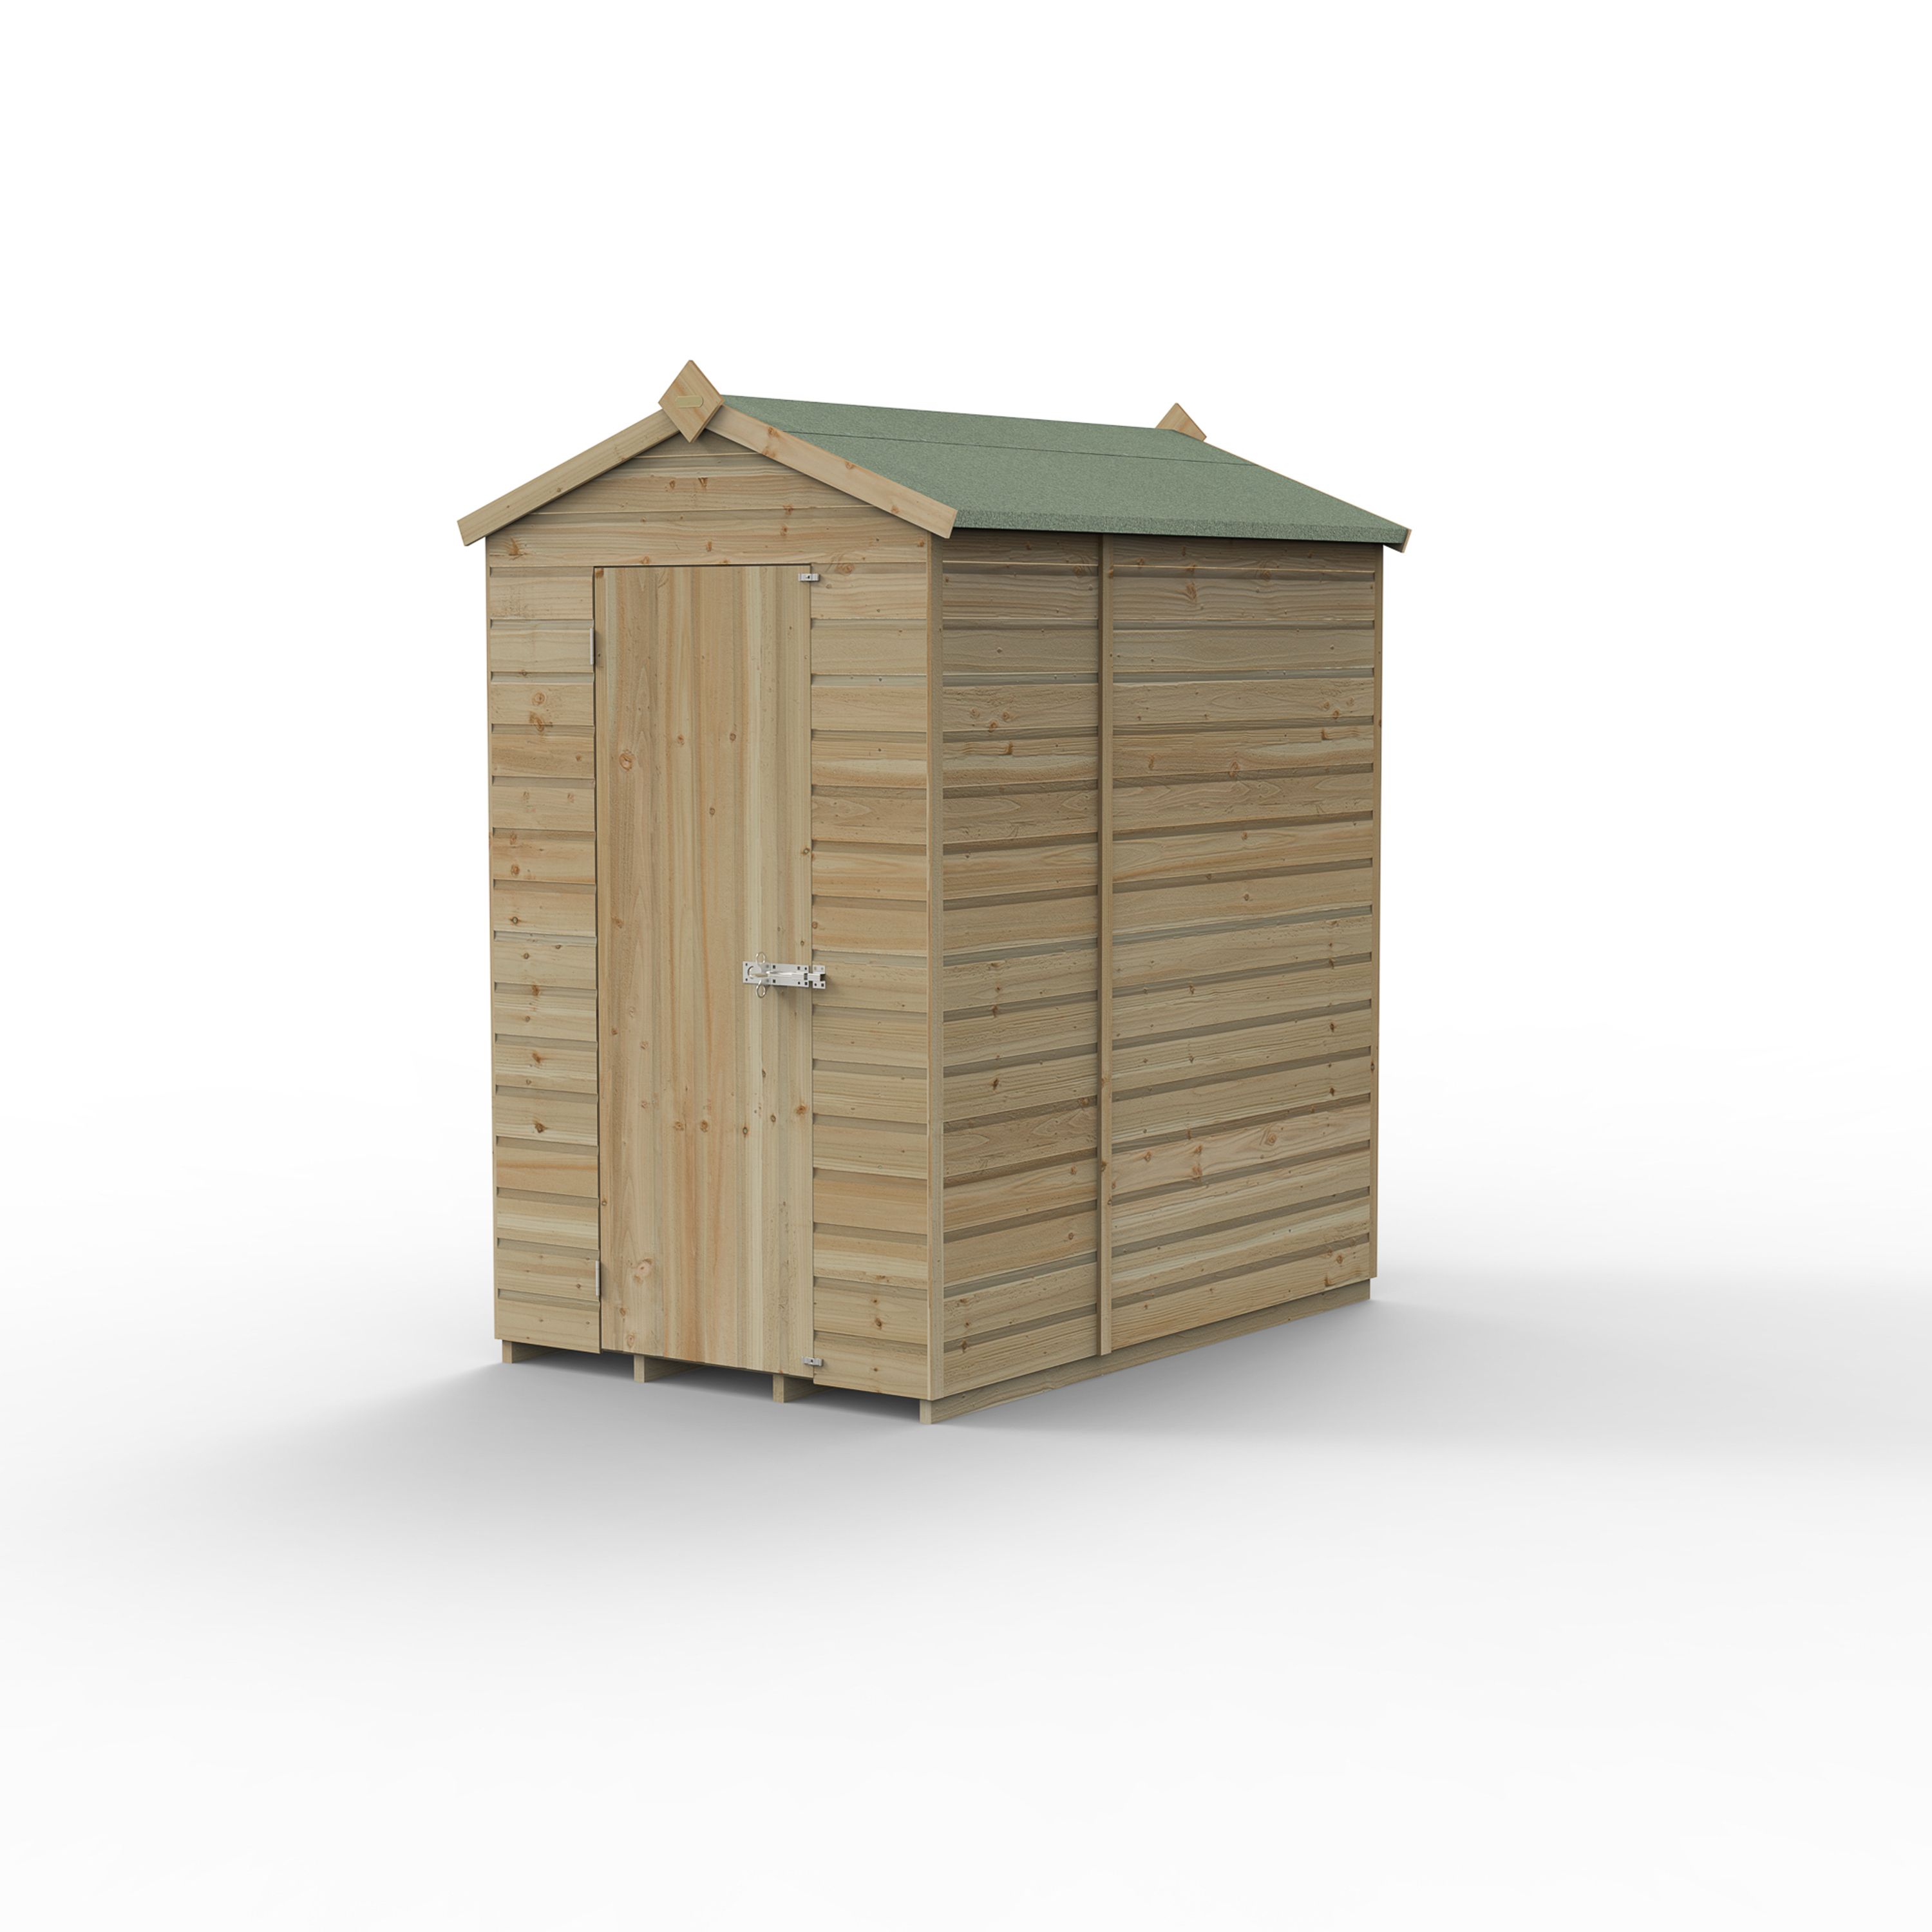 Forest Garden Beckwood 6x4 ft Apex Natural timber Wooden Shed with floor - Assembly not required